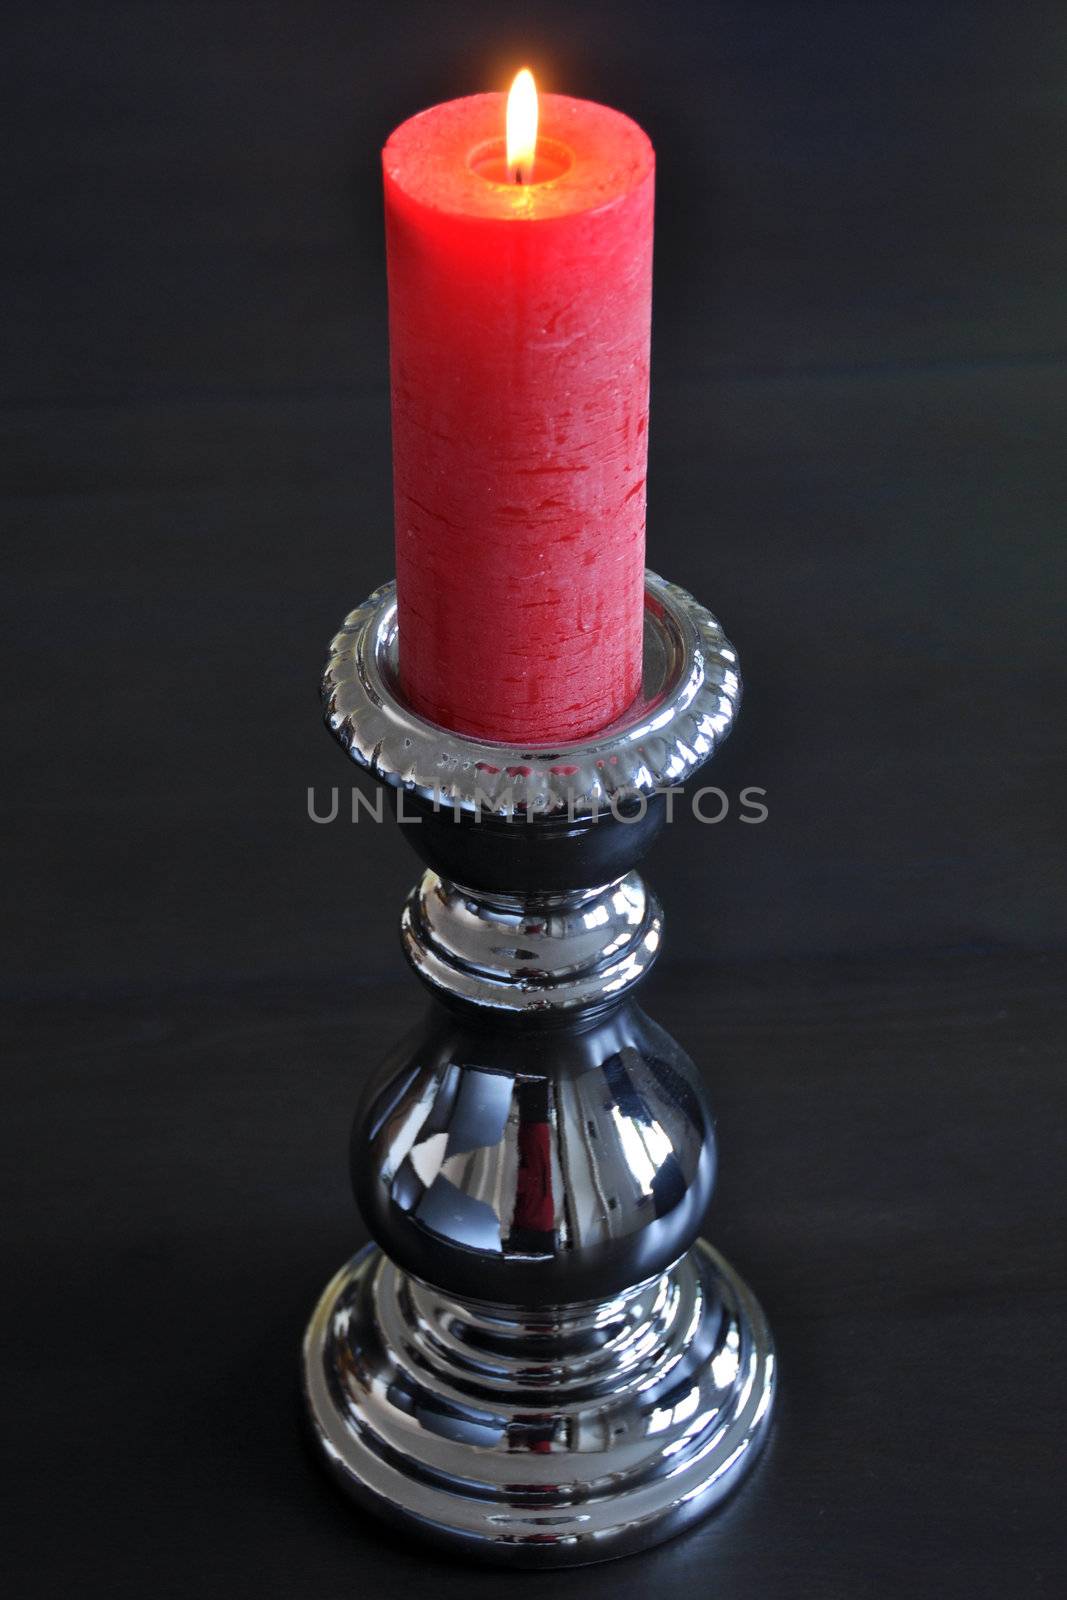 Burning red candle in silver holder on dark wooden table